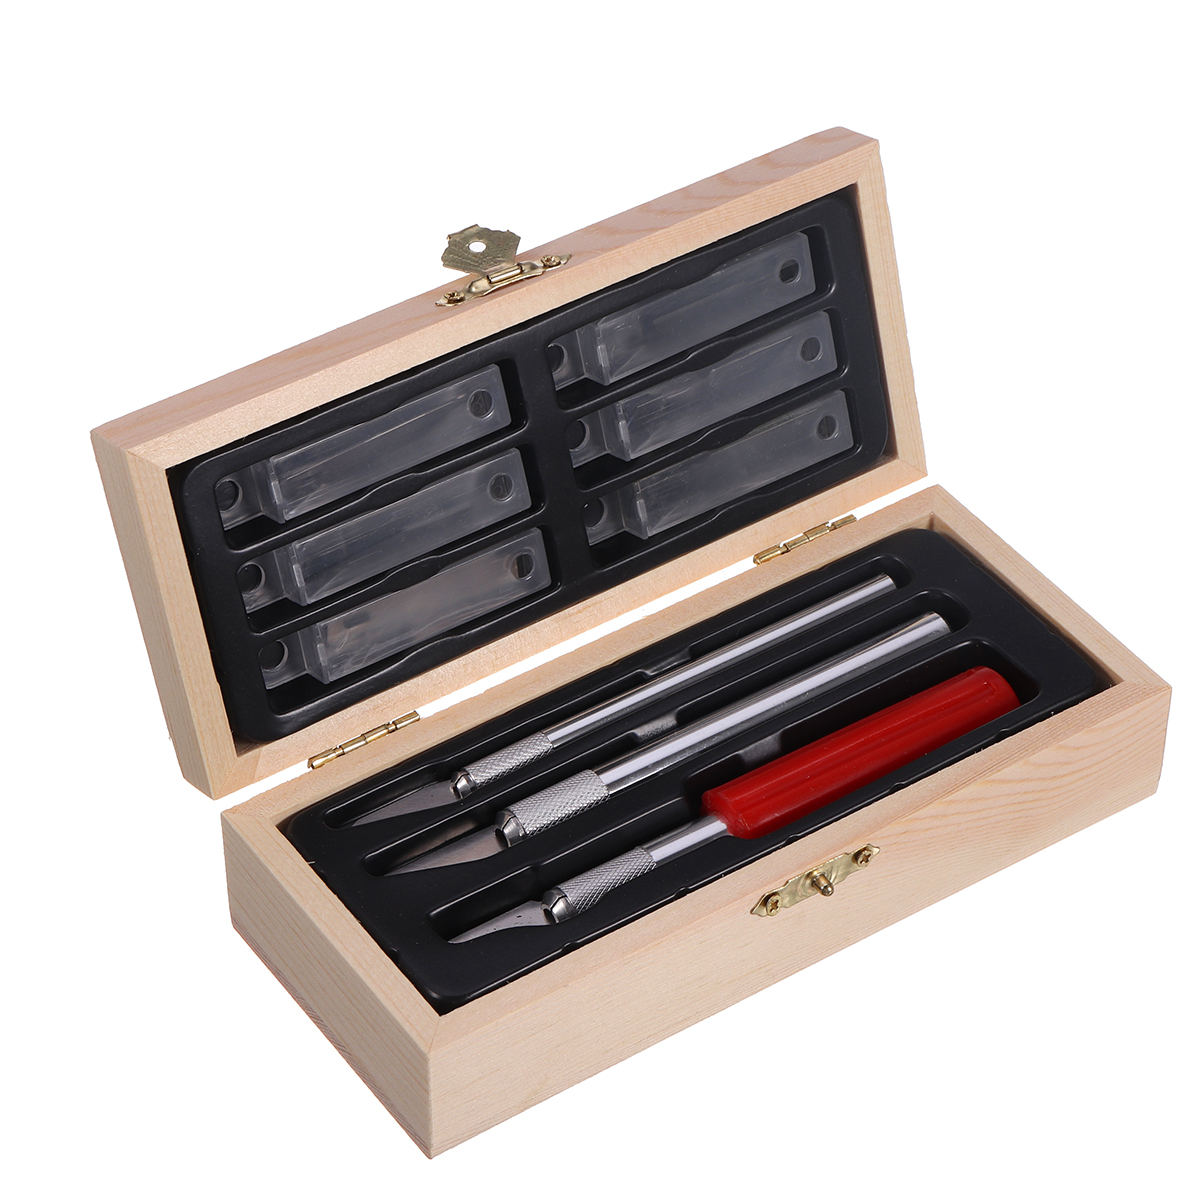 13PcsSet-Carving-Craft-Knive-Pen-Engraving-Blade-Wood-Cutter-Repair-Hand-Tools-Kit-1707554-3